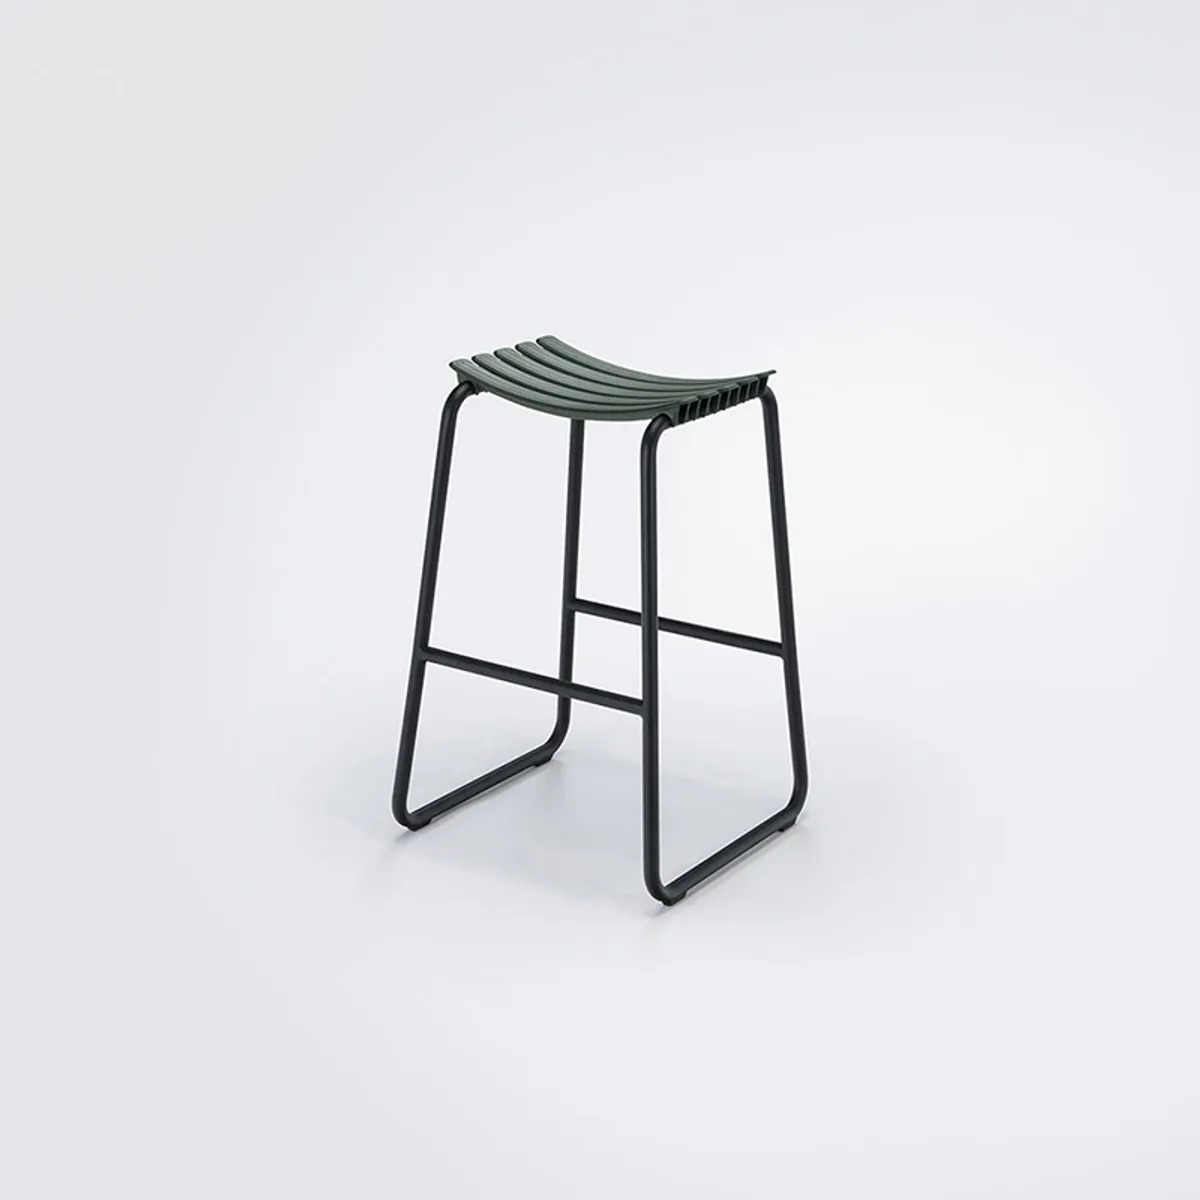 Snip Stool Outdoor Metal And Plastic Furniture For Hotels And Cafes 033